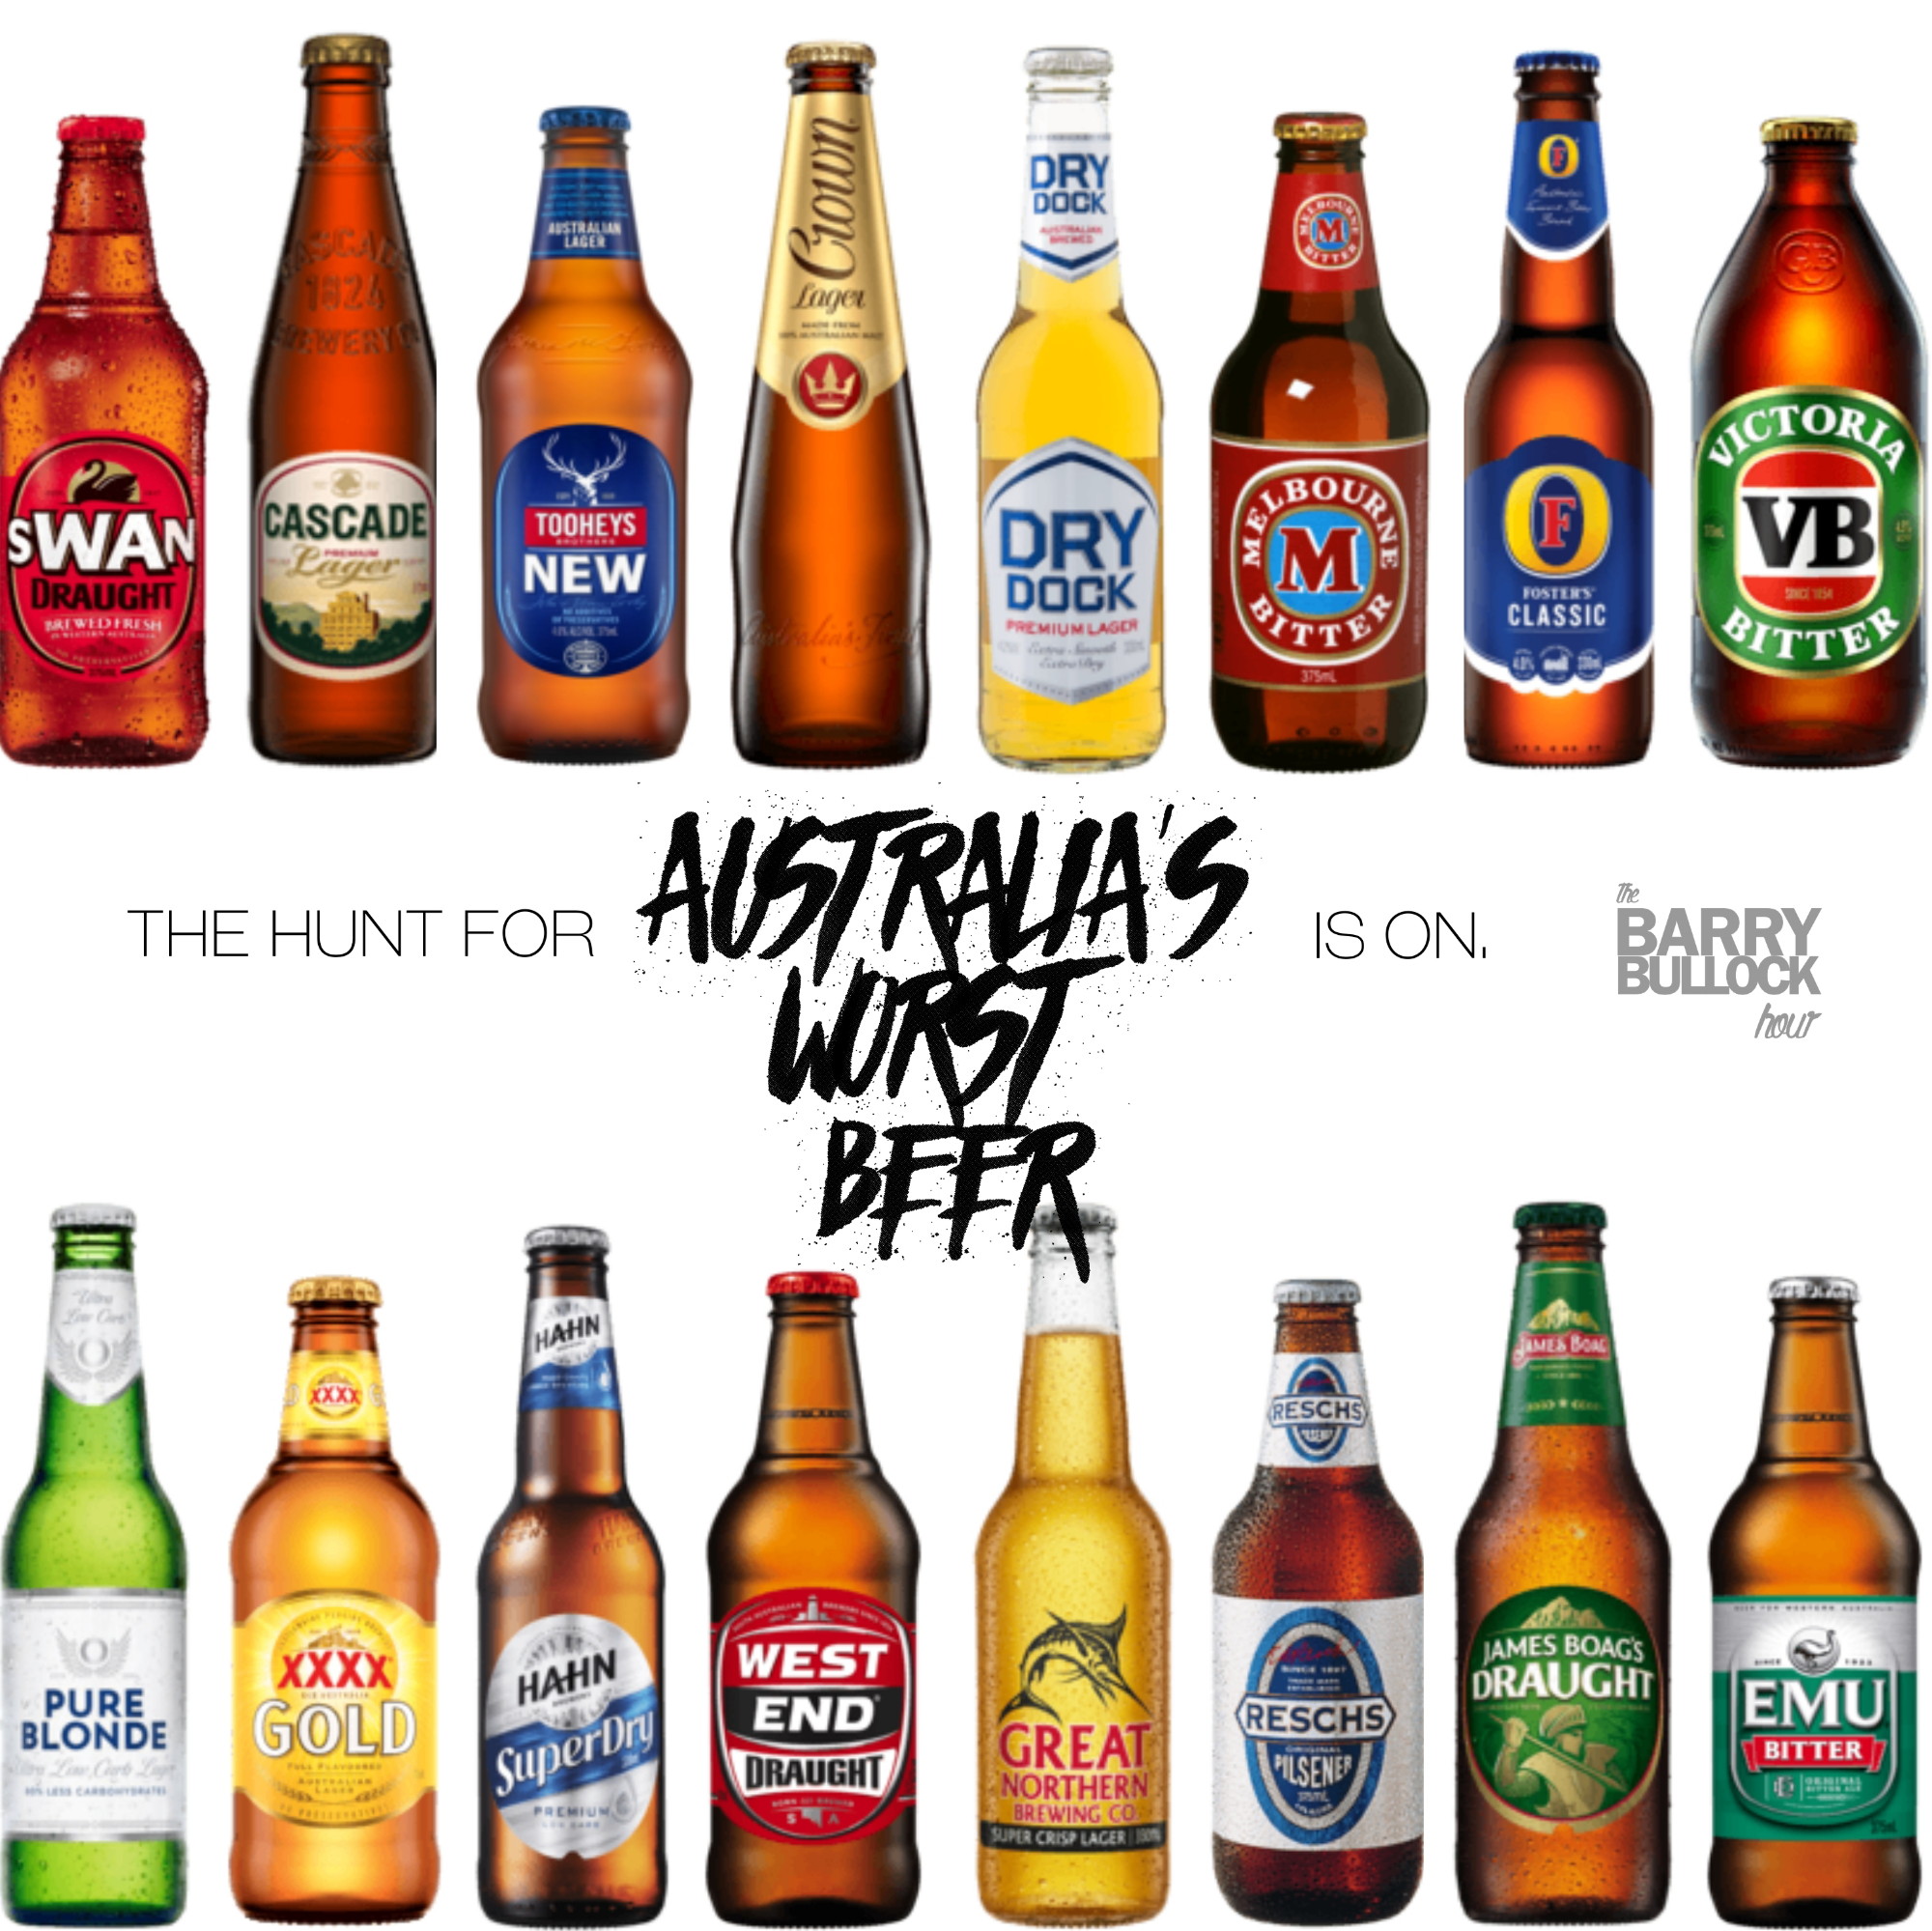 Episode 017 - The hunt for #AustraliasWorstBeer begins, the election day sausage sizzle debacle, and Tom Jones